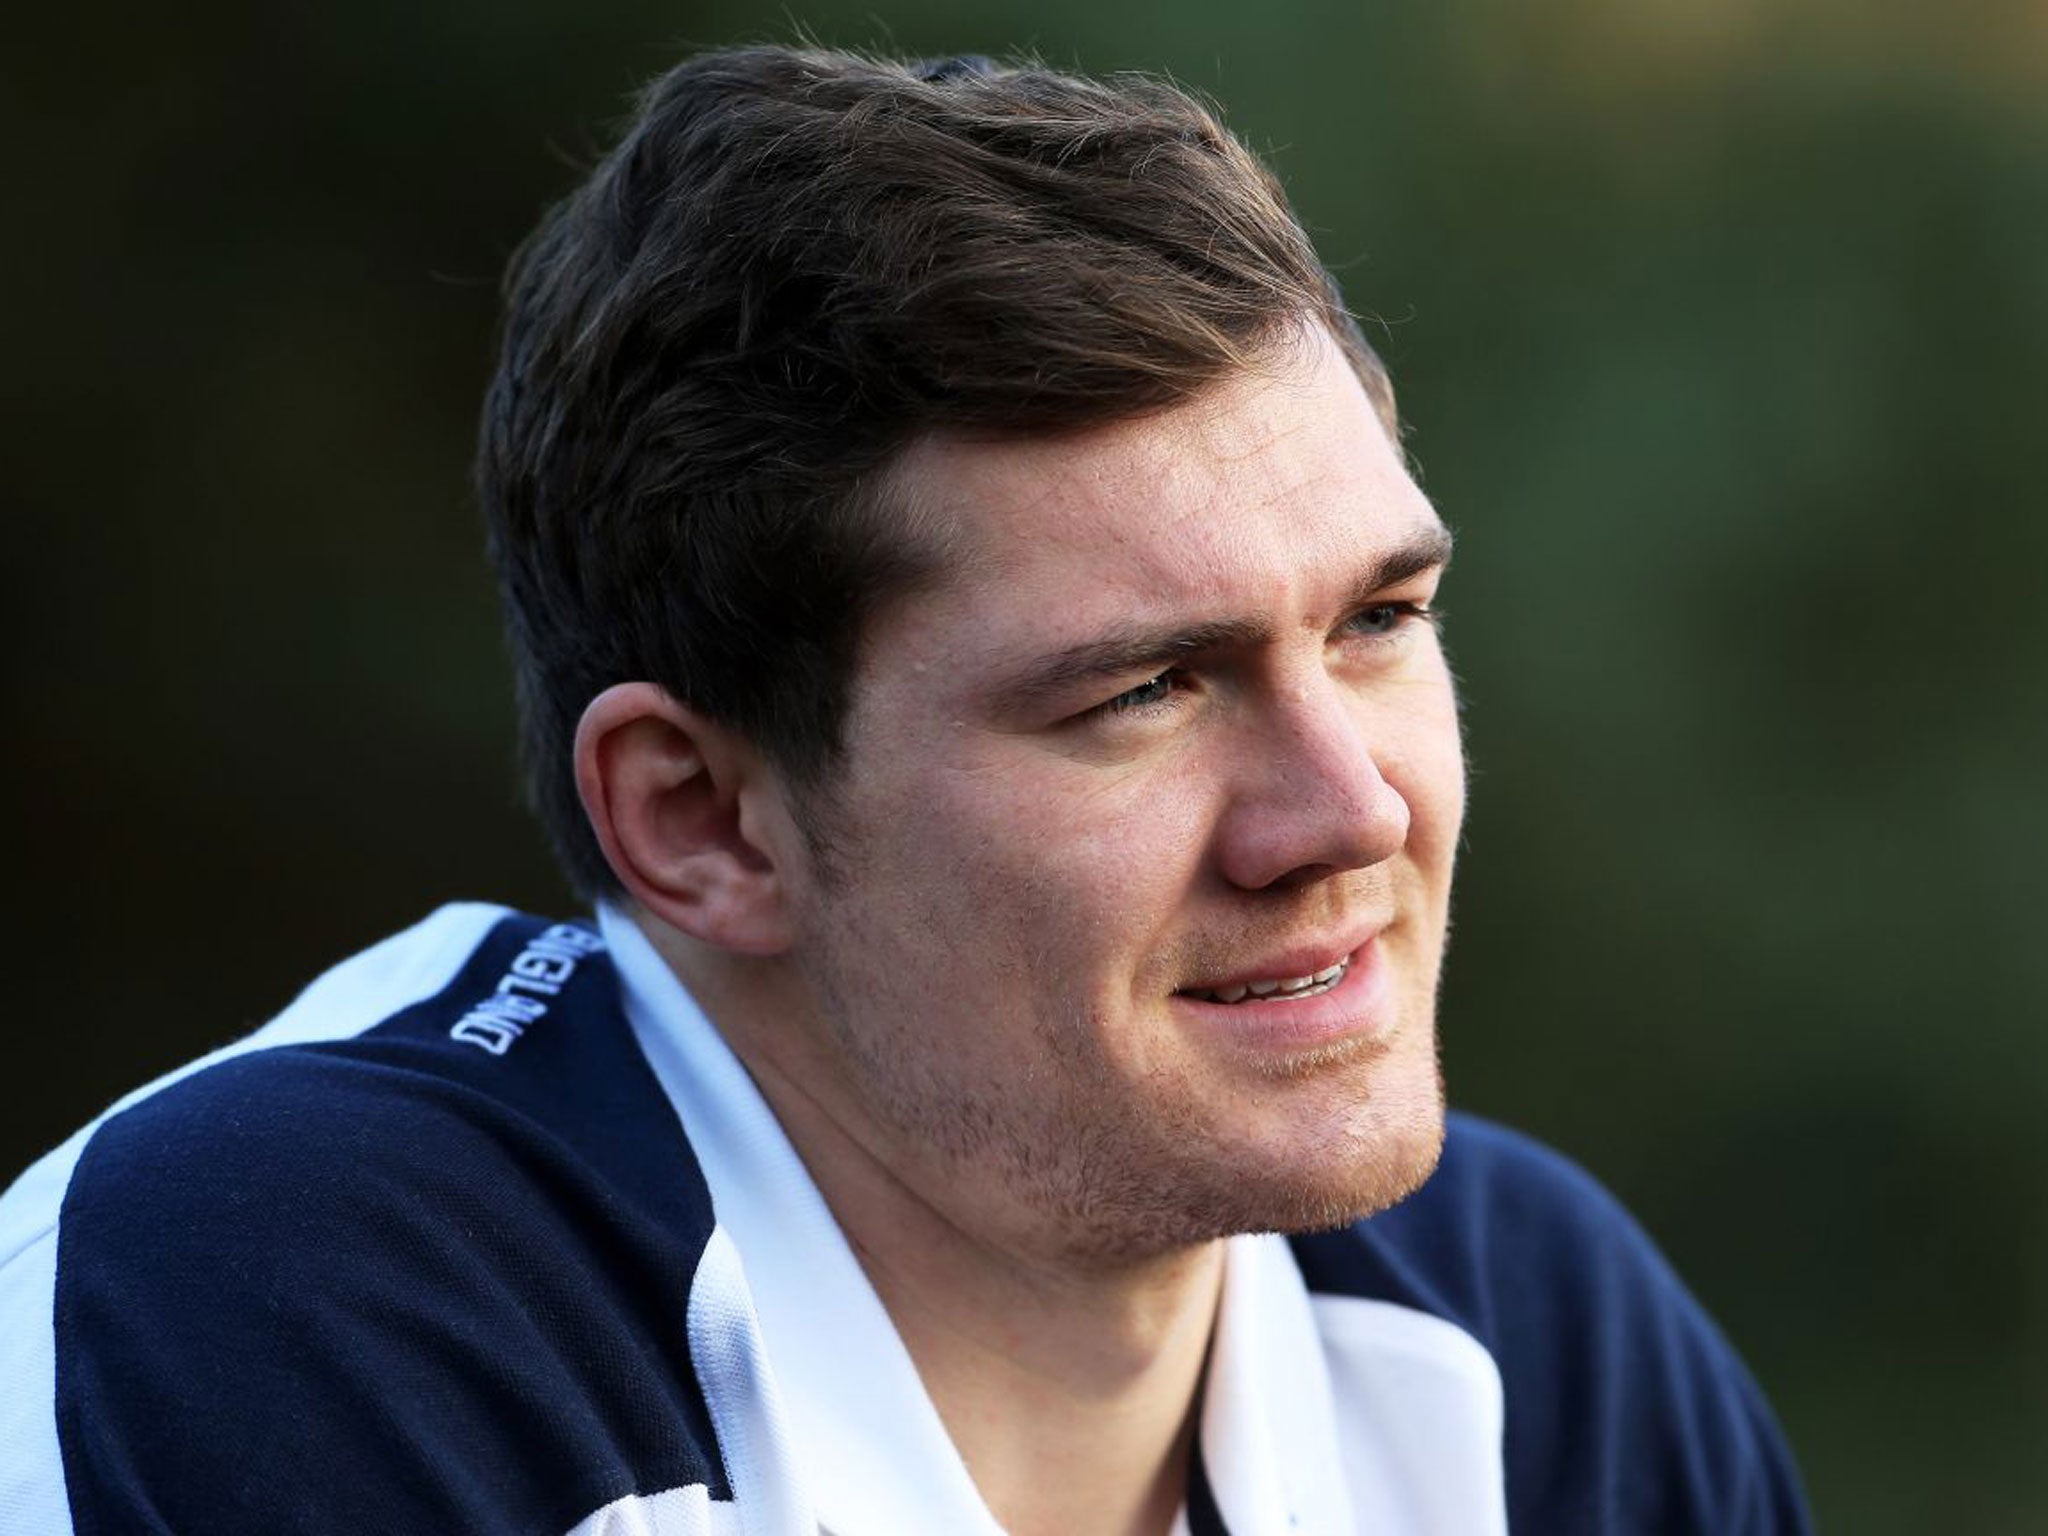 ‘The game changes all the time and the full-back role with it,’ says Alex Goode